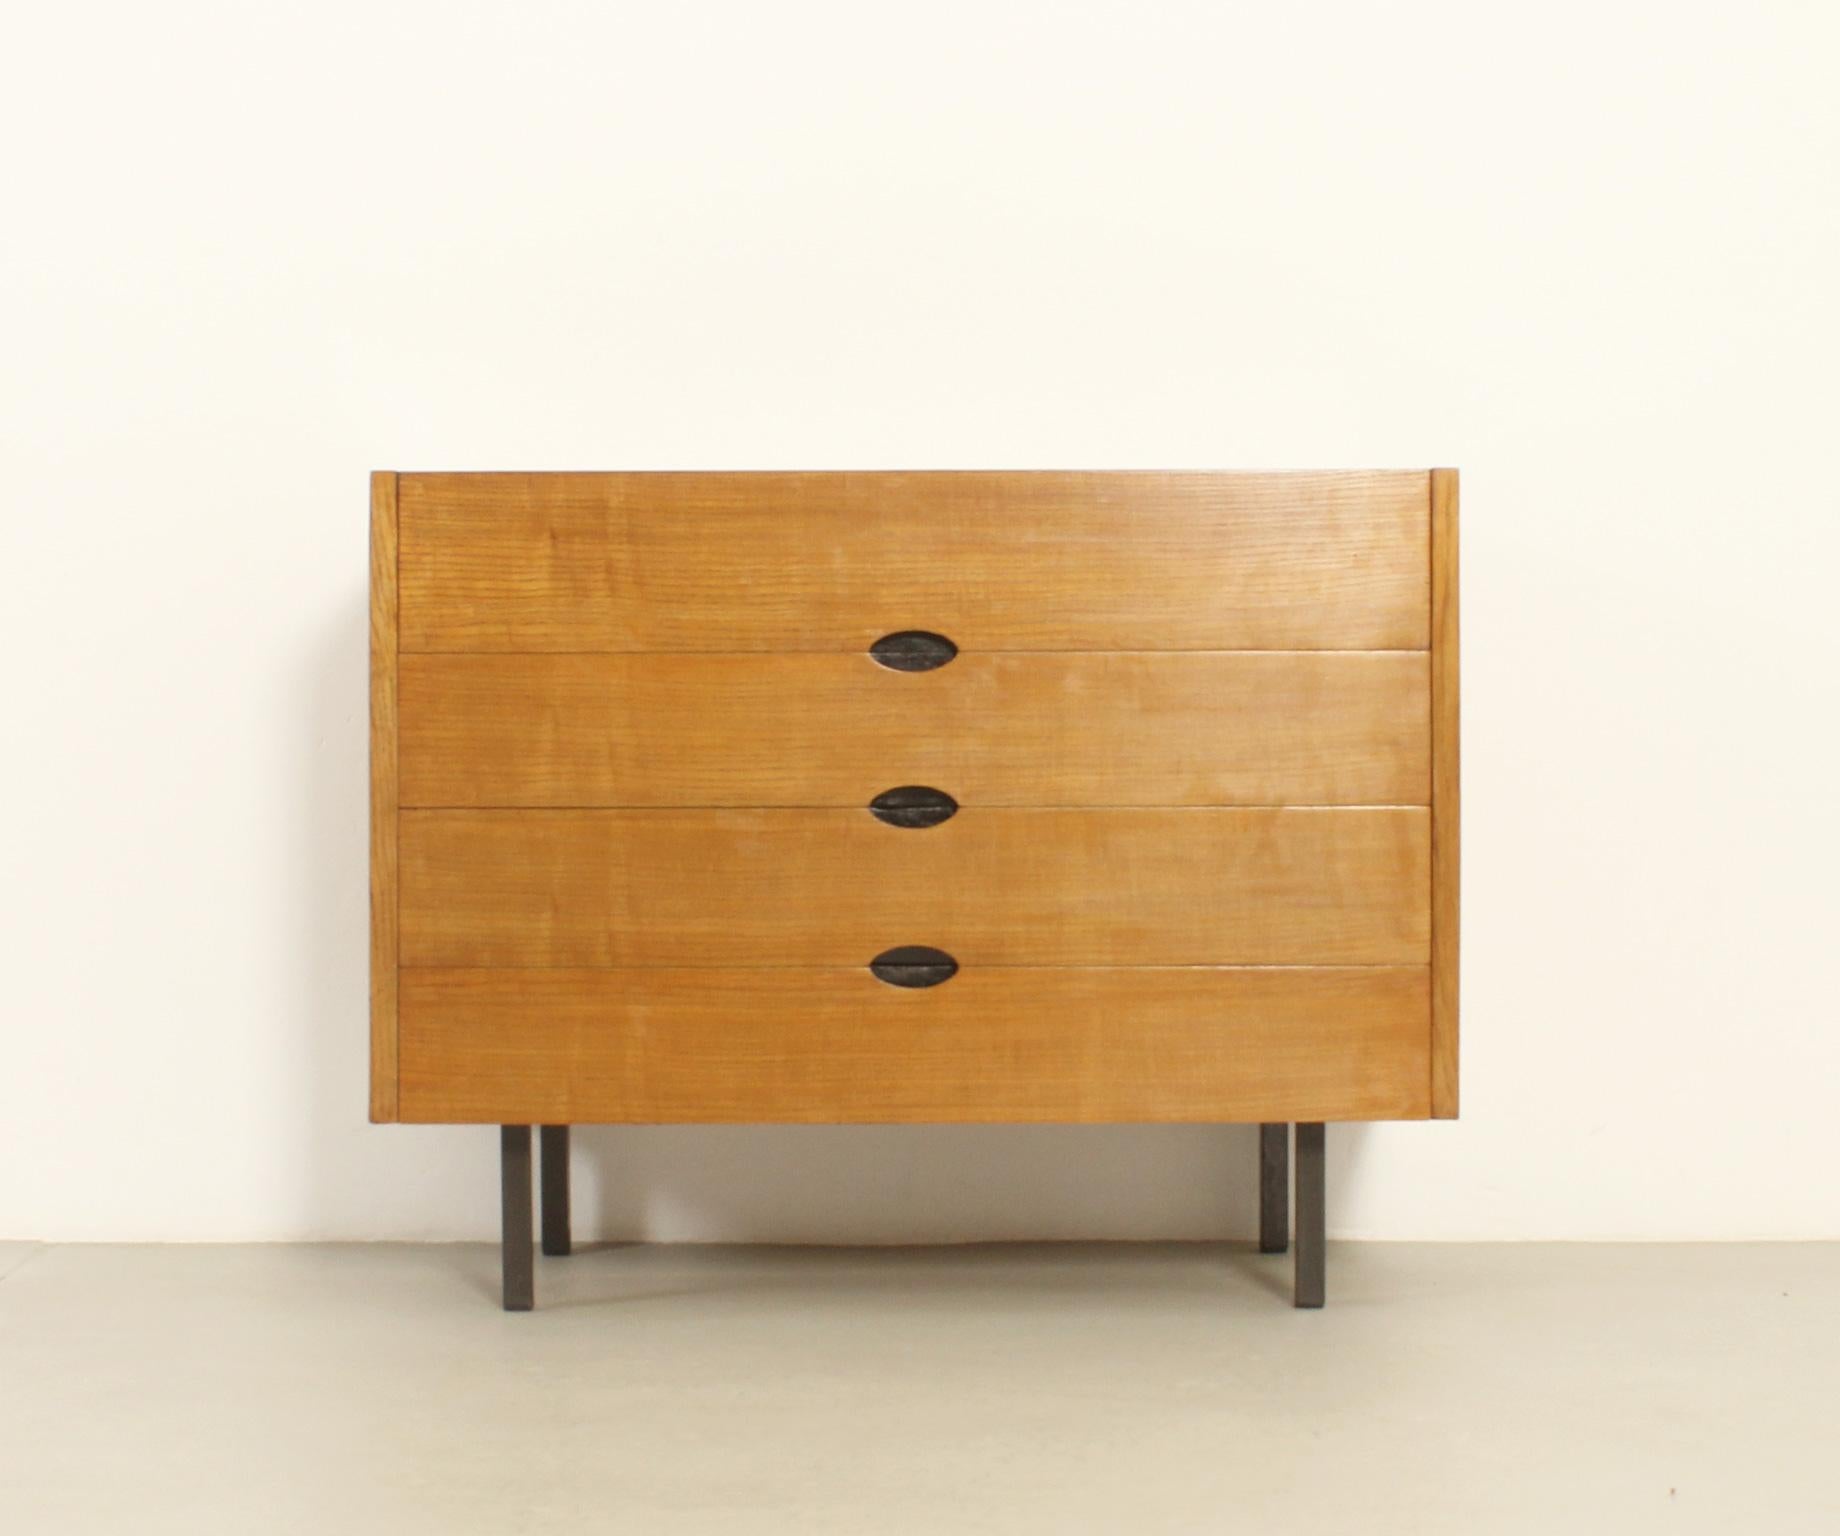 Chest of drawers designed in 1960's by Joseph-André Motte and edited by Charron, France. Oak wood with black lacquered metal legs. Three large drawers and folding top space with workspace surface.